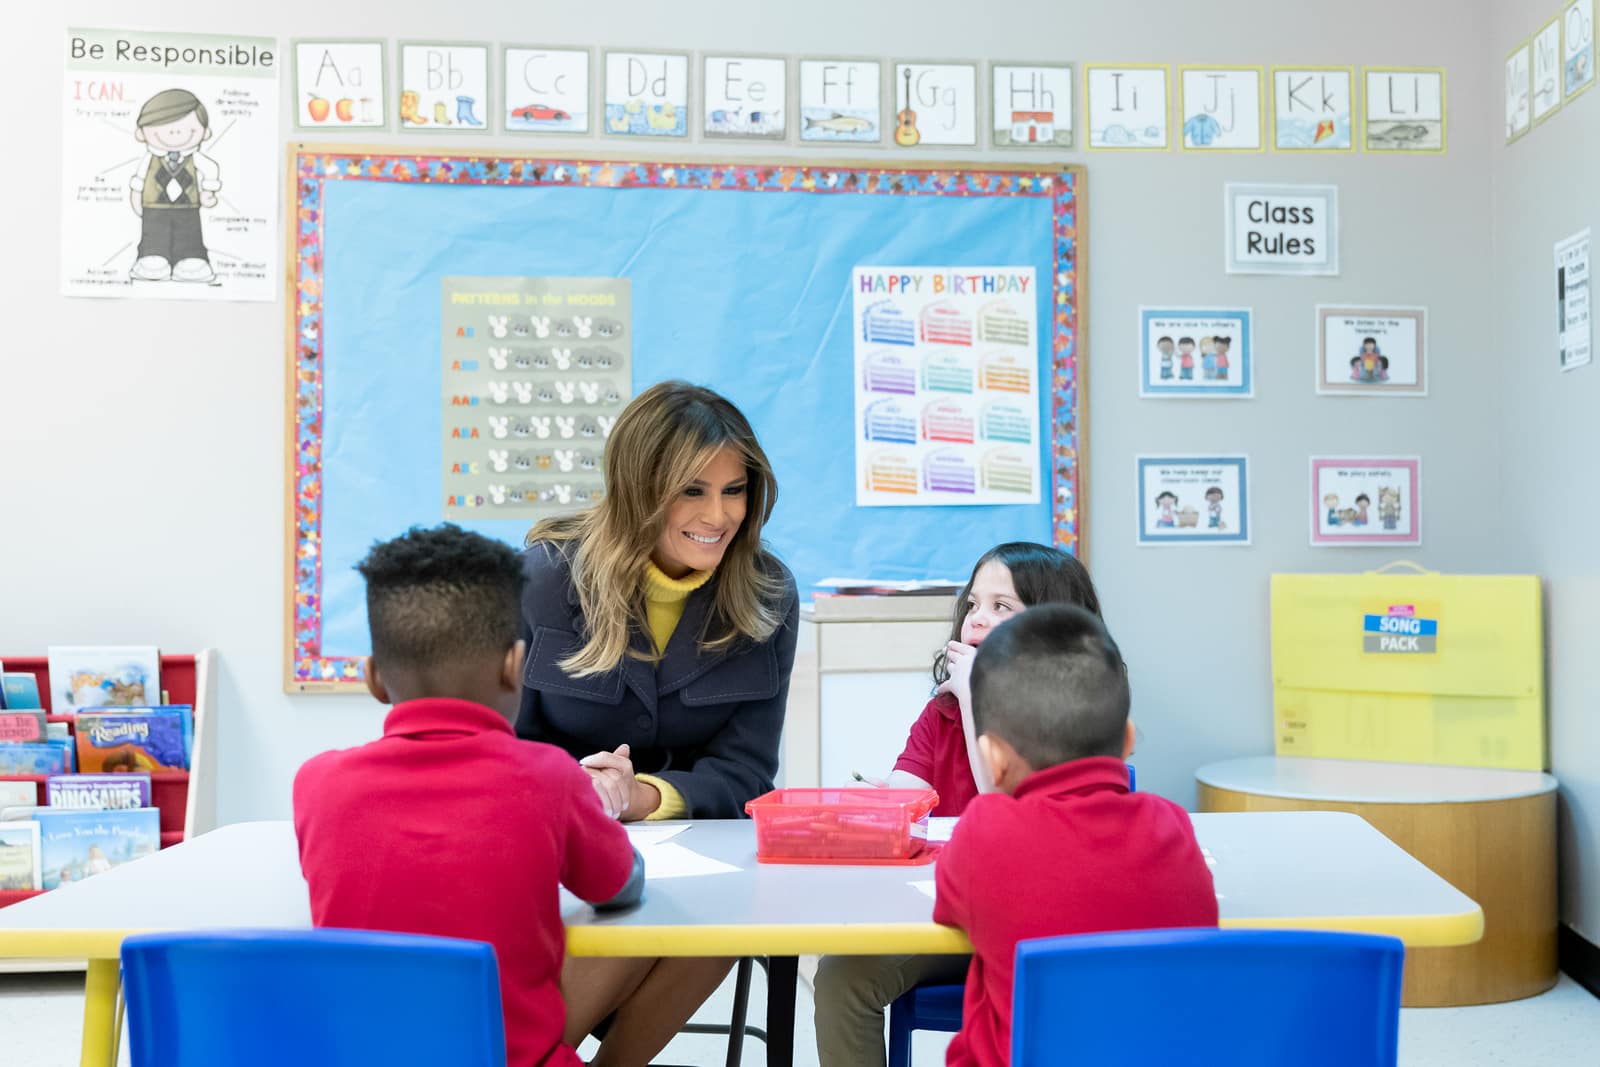 Melania trump attended school in Tulsa, becoming the first President’s wife, who came to the city on an official visit